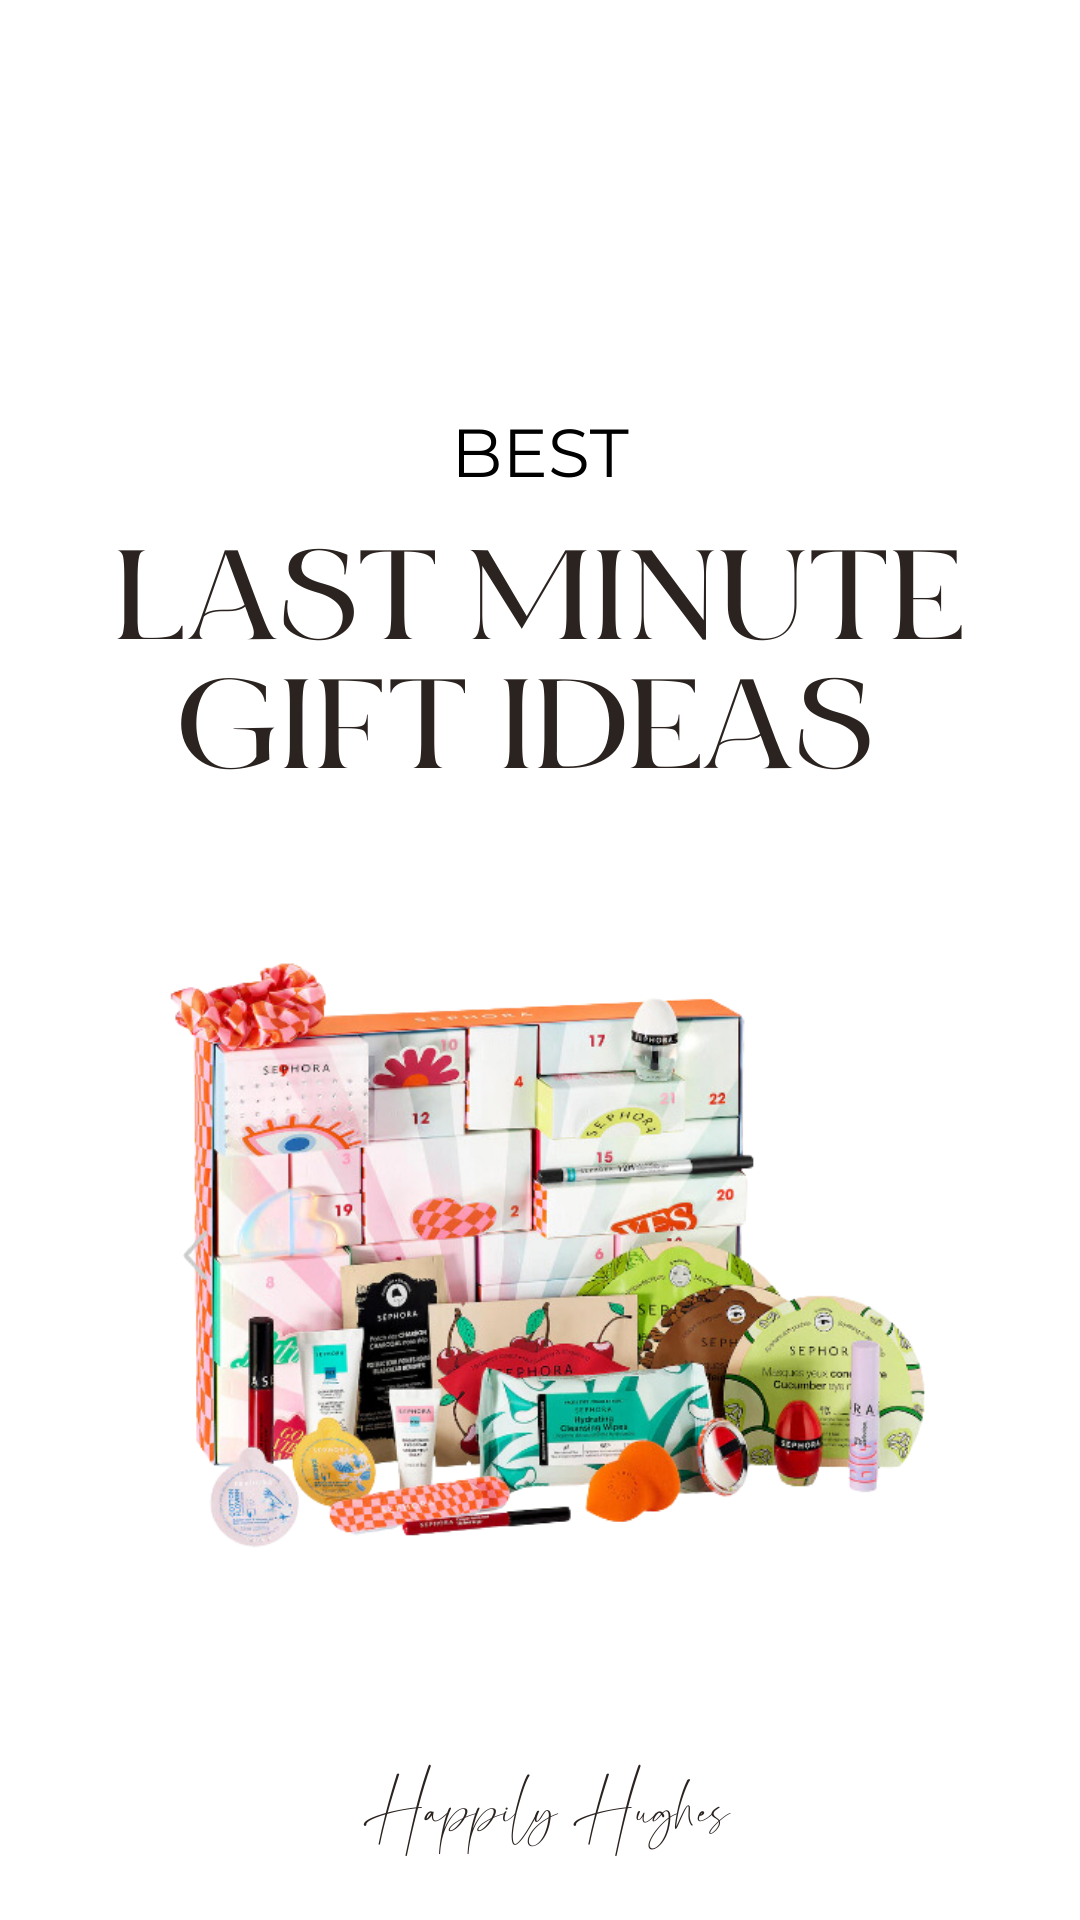 Best Last Minute Gift Ideas and Gift Sets for Her